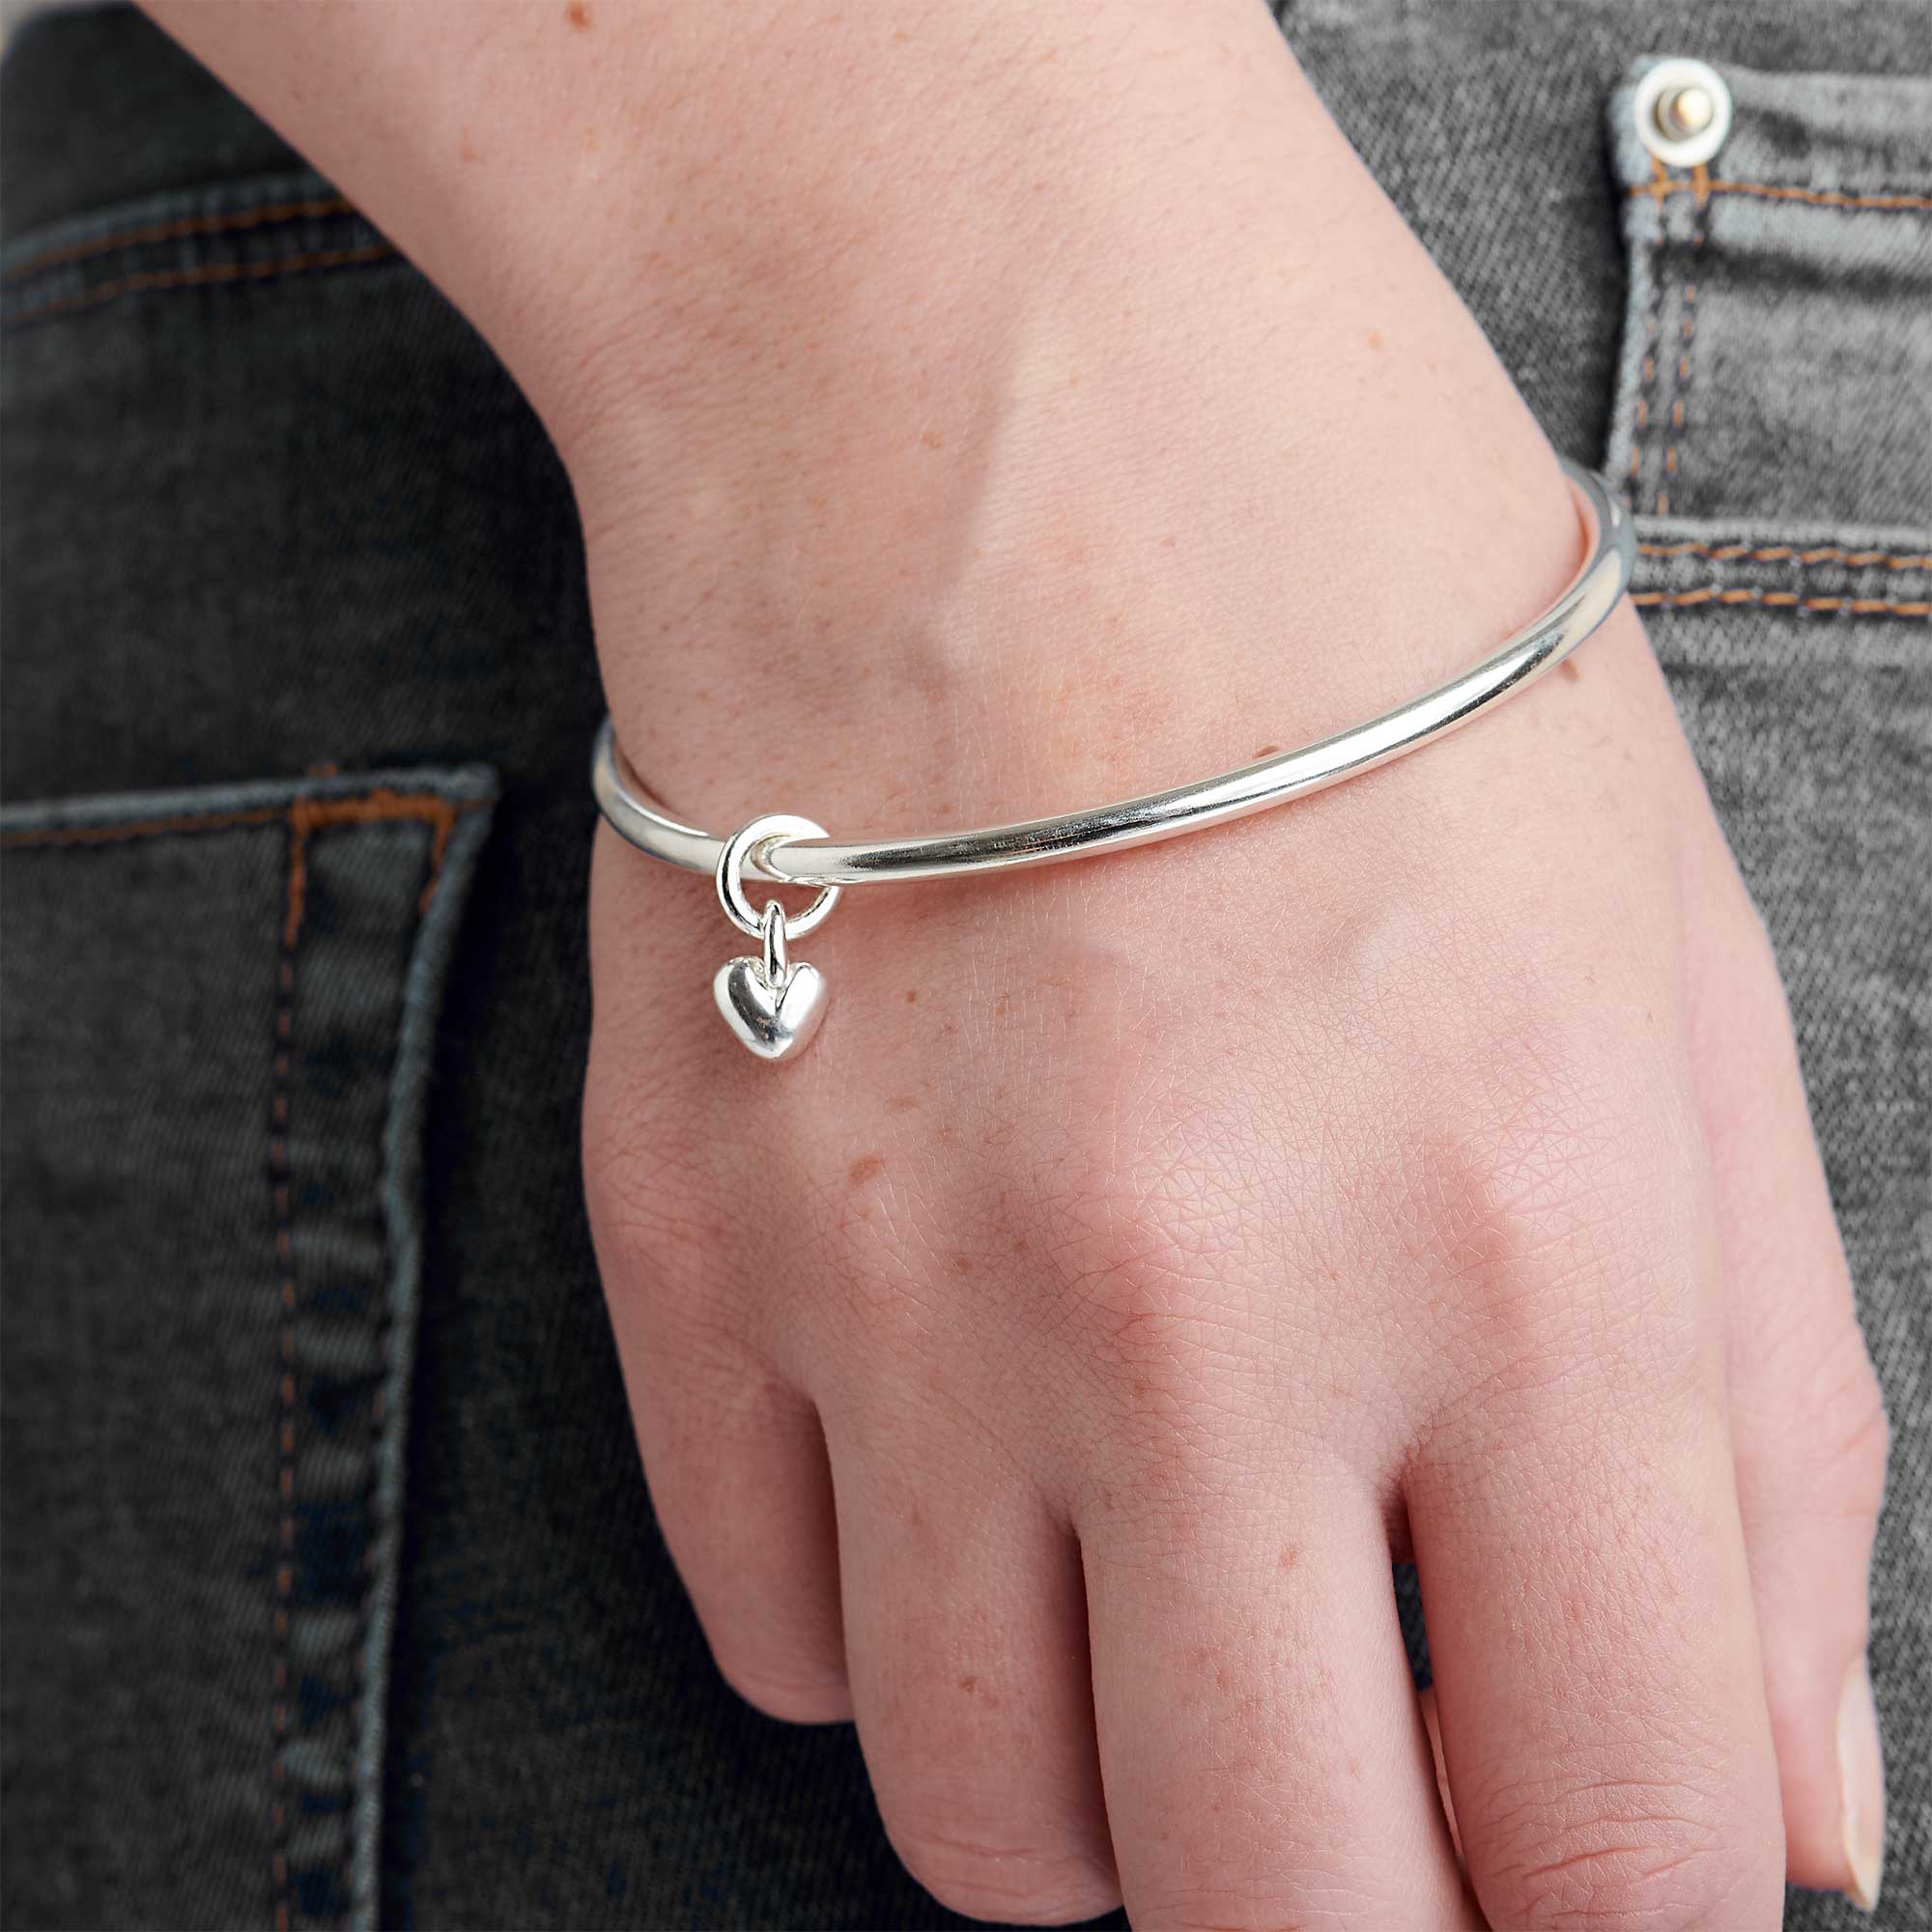 Recycled silver heart charm bangle made in UK by Scarlett Jewellery